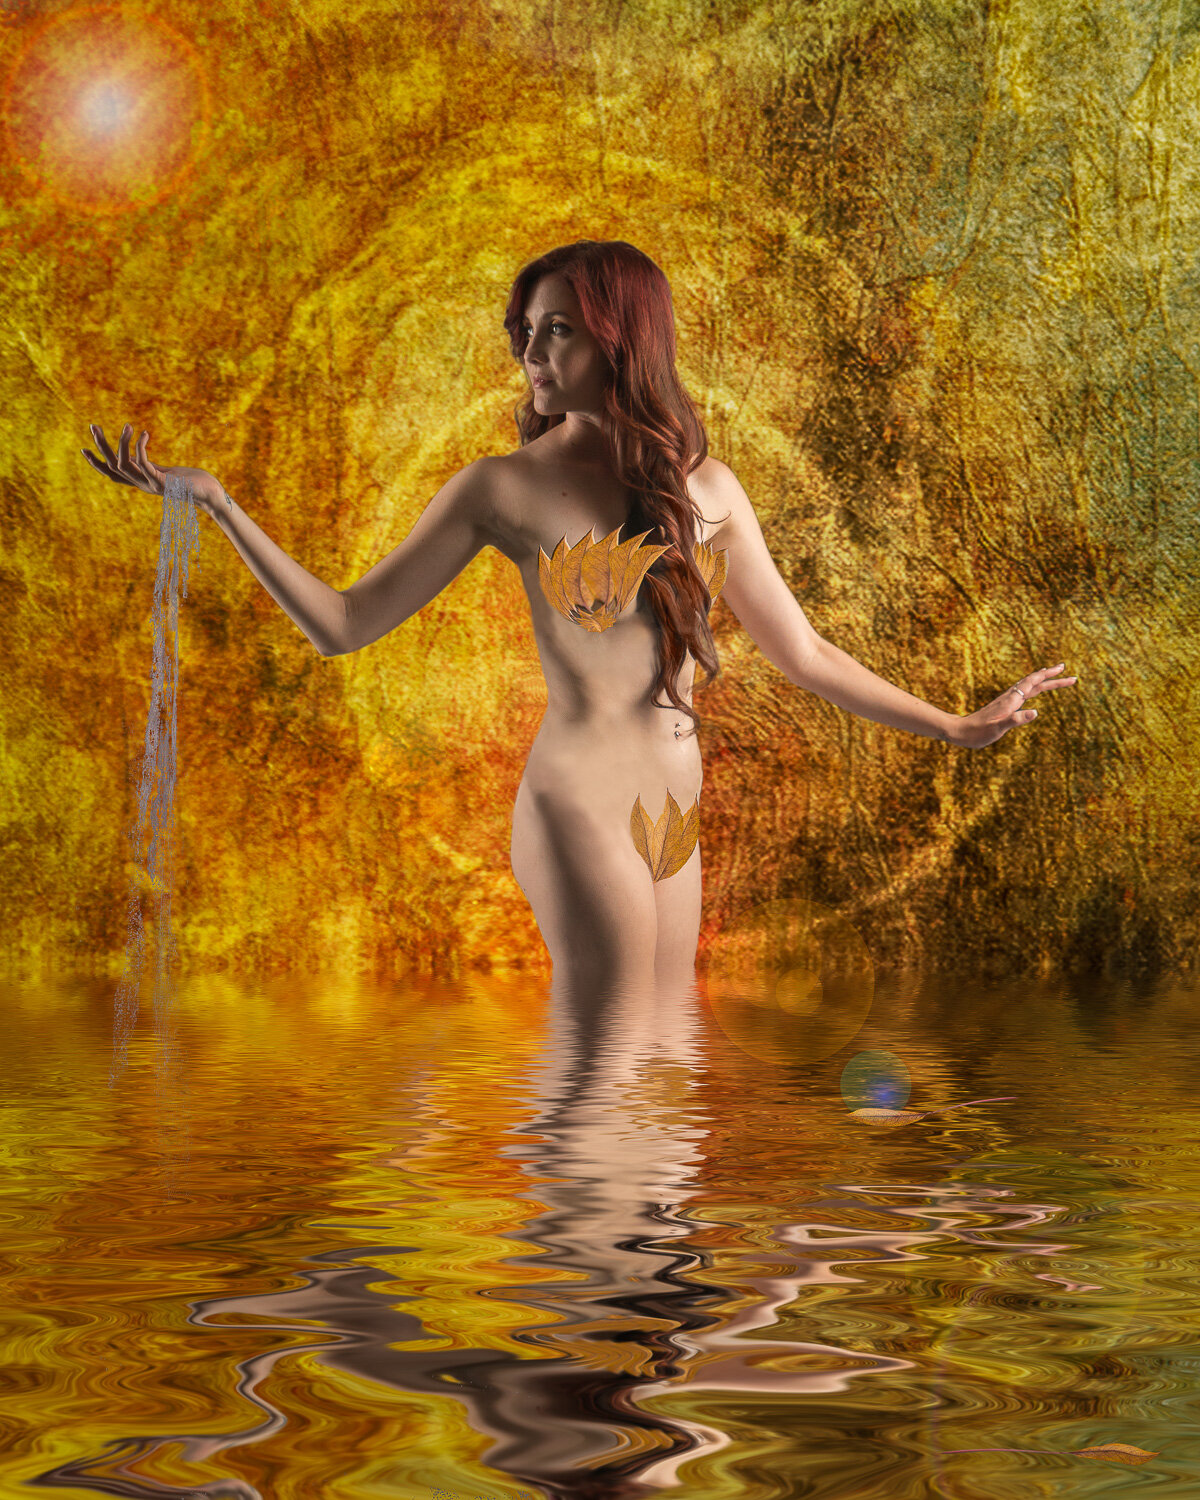 boudoir portrait photo, woman in water with reflection, Cowichan Valley to Nanaimo